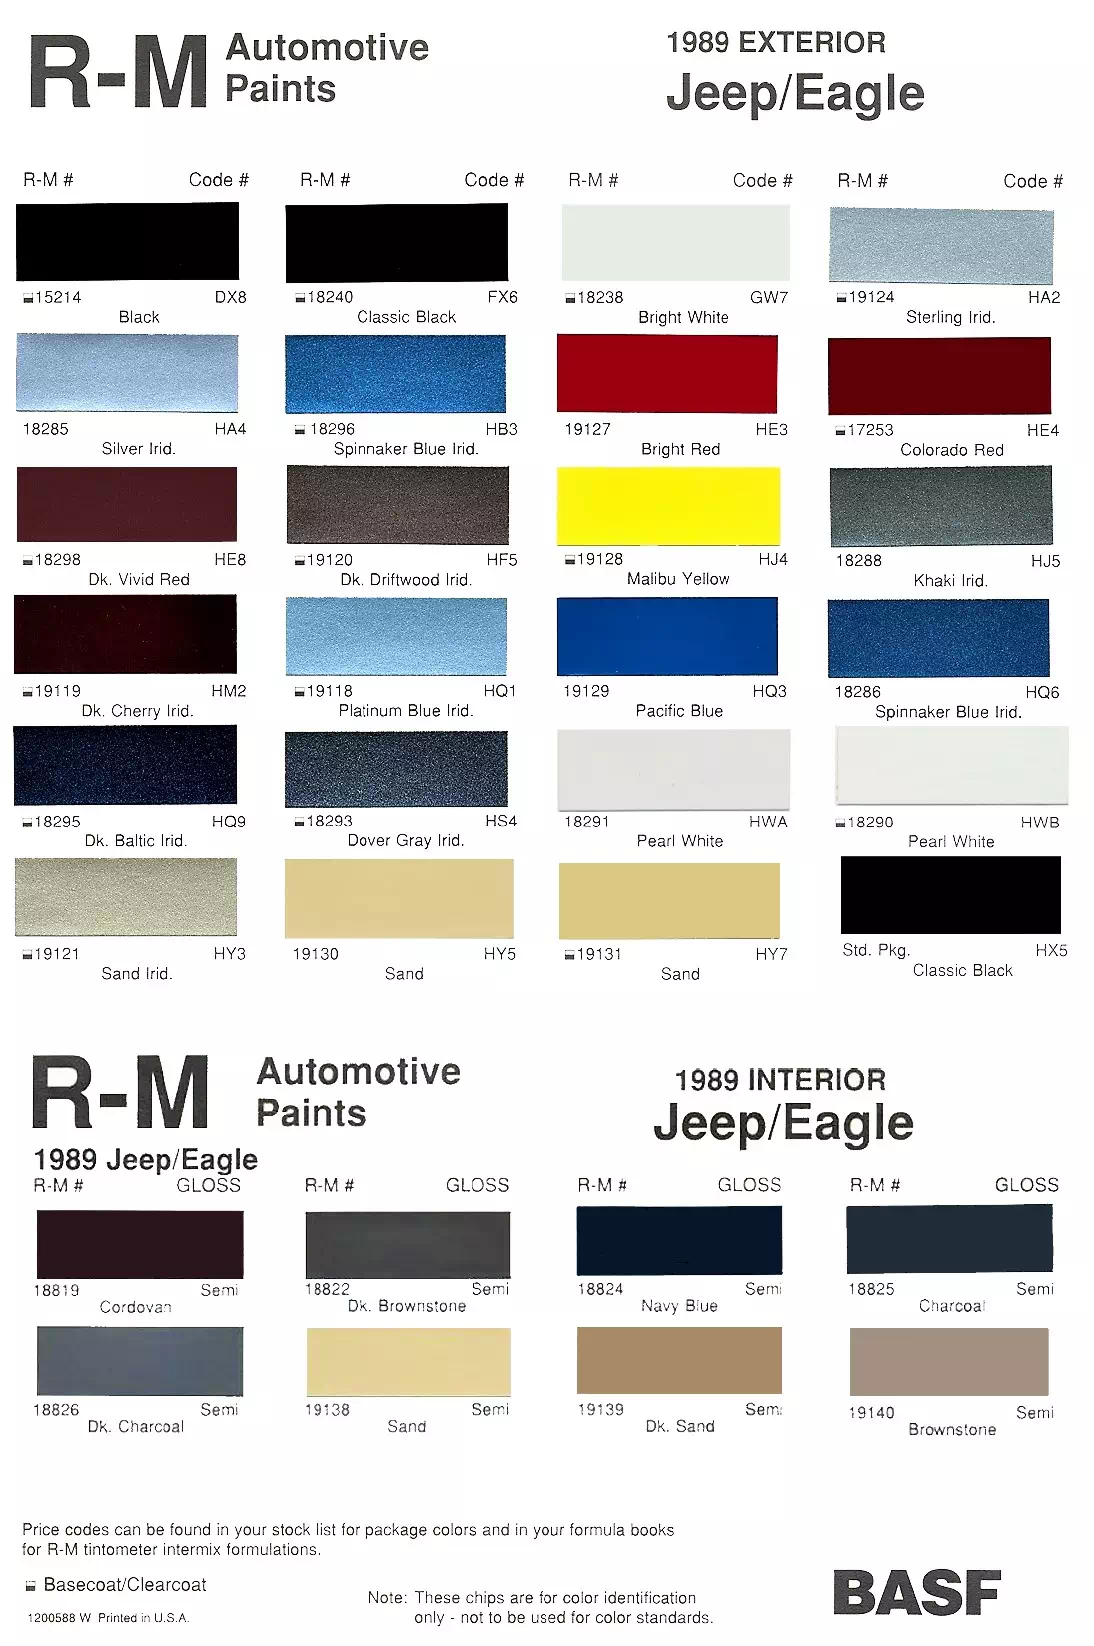 oem color codes, color examples, and mixing stock numbers for exterior and interior jeep and eagle vehicles made in 1989